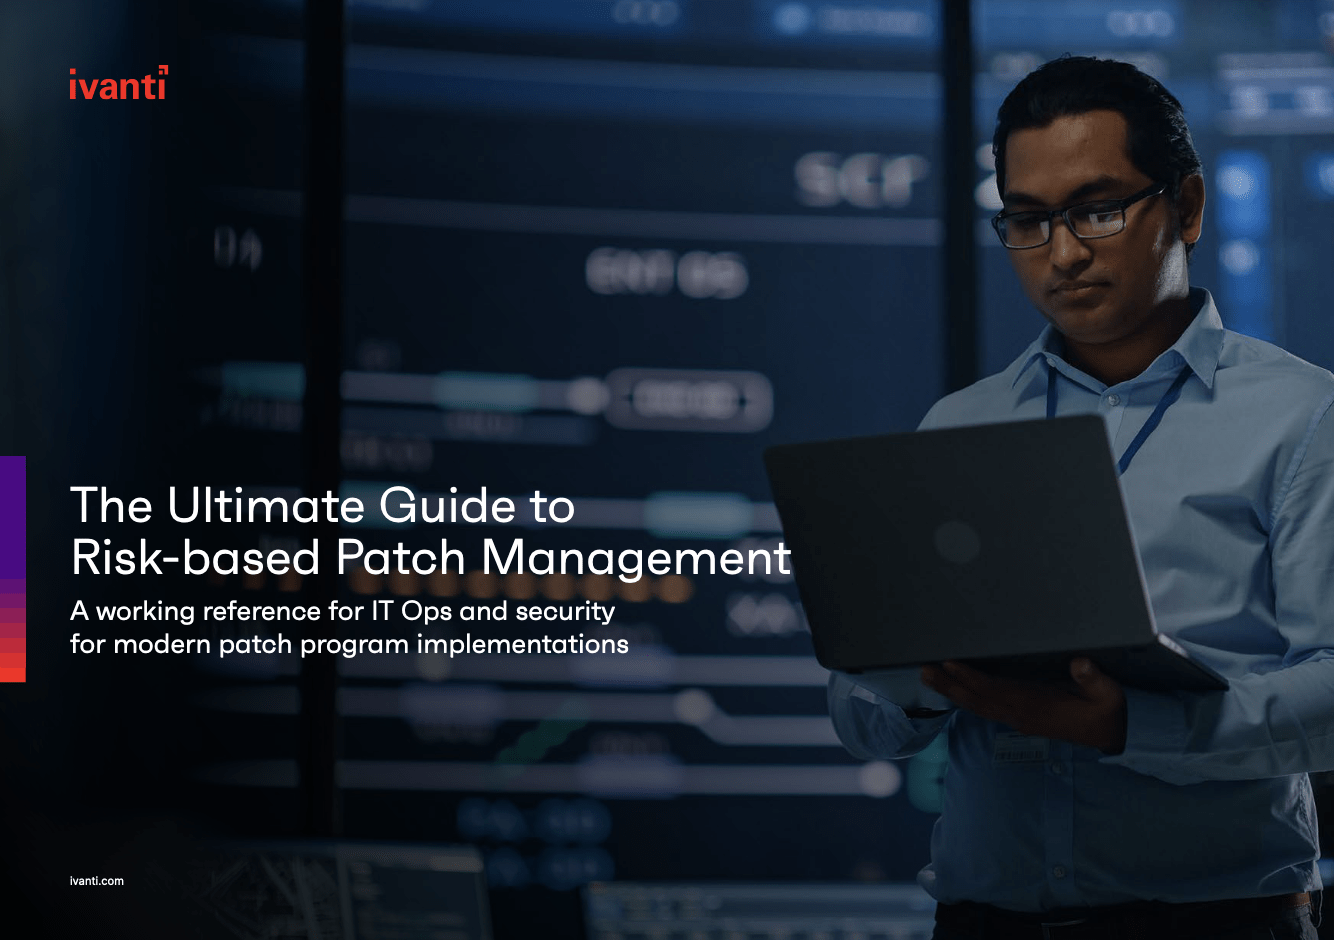 untimate guide - The Ultimate Guide to Risk-based Patch Management